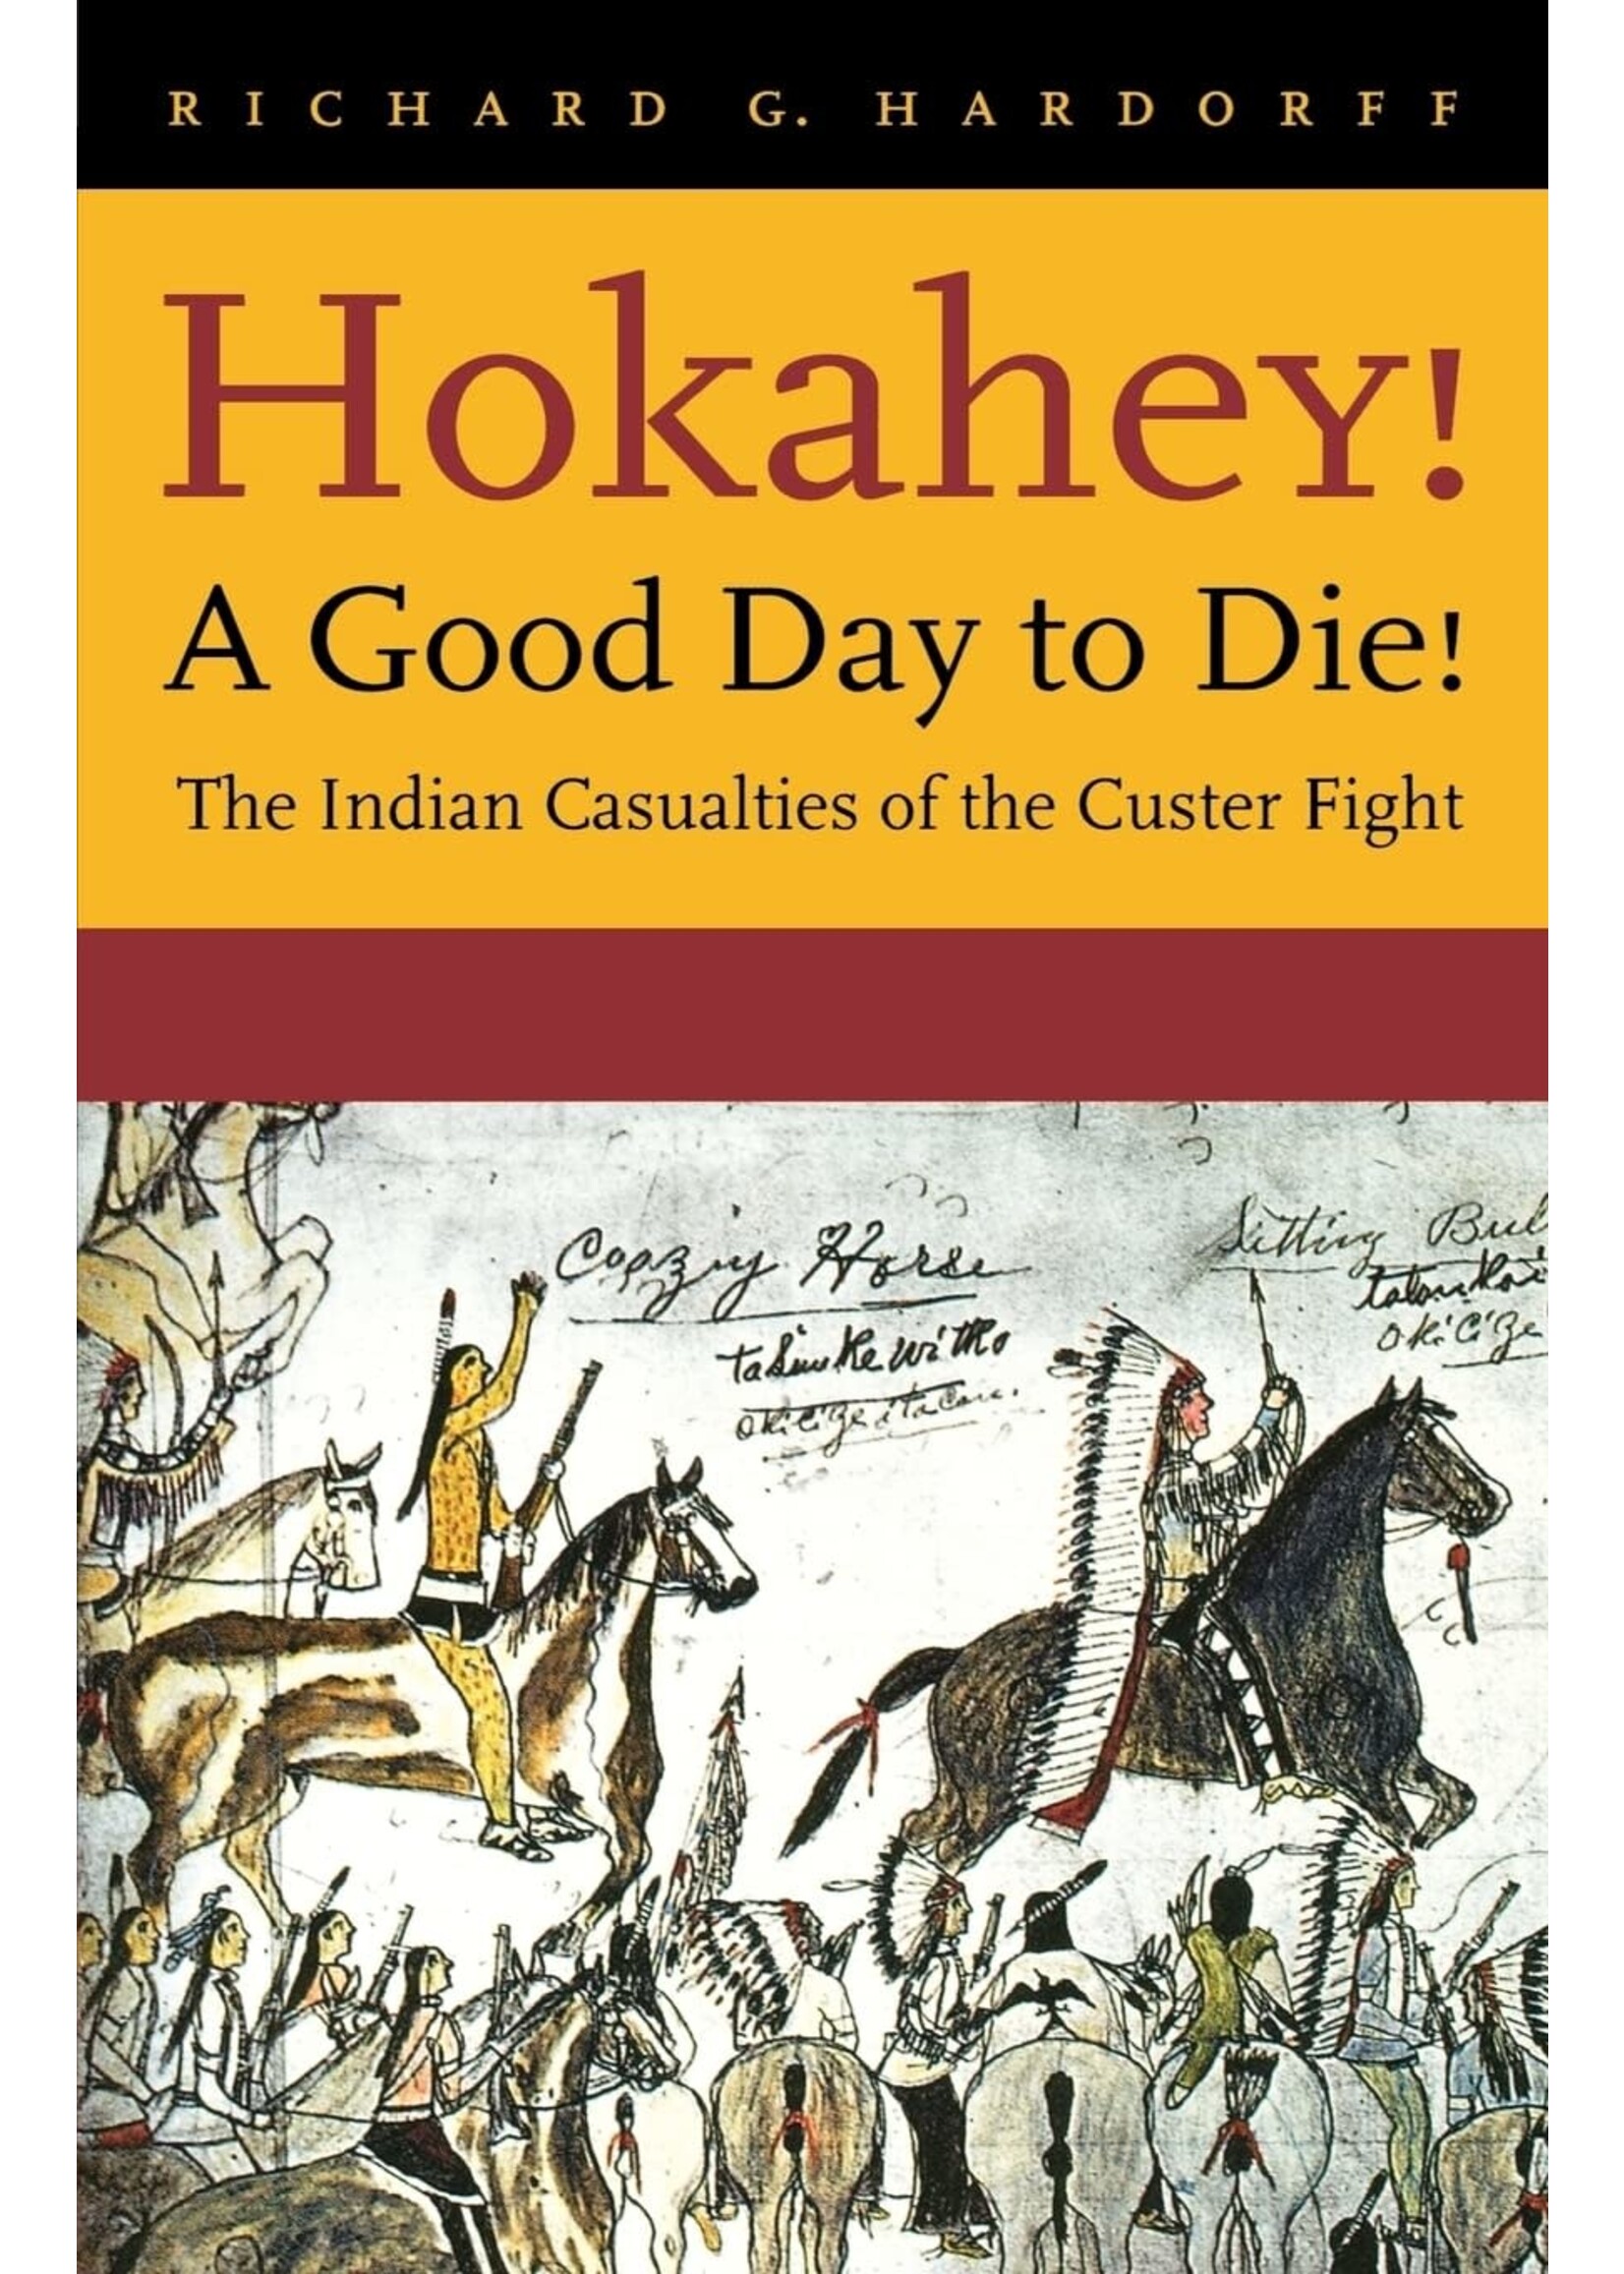 Hokahey! A Good Day to Die! The Indian Casualties of the Custer Fight